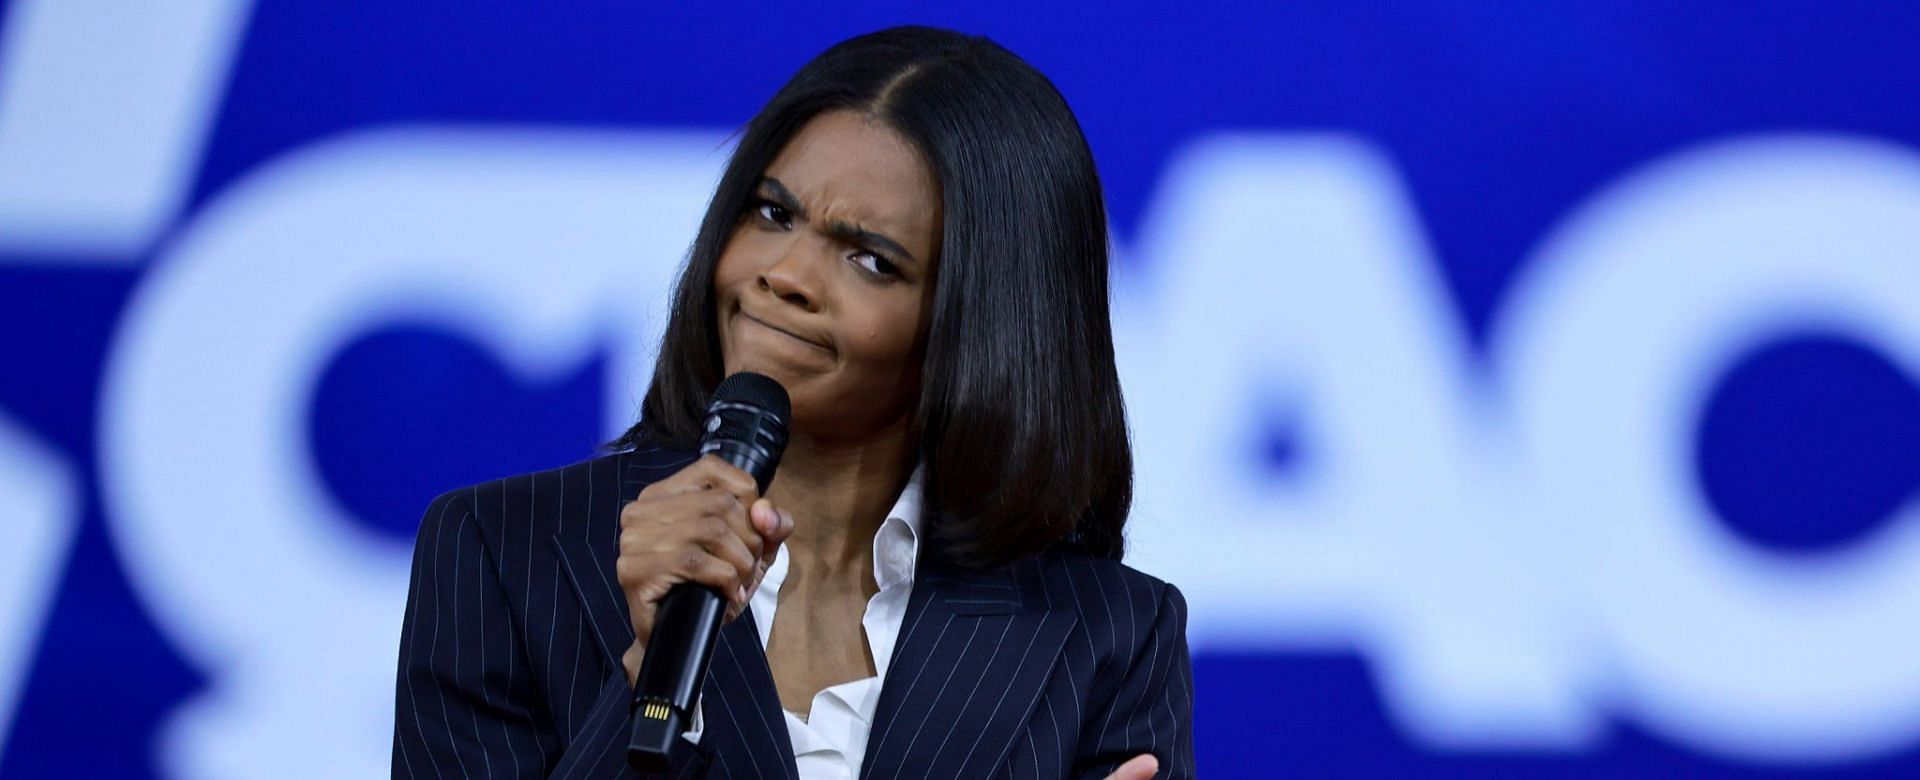 What Did Candace Owens Say Trans Controversy Explained As Conservative Influencers Remarks On 